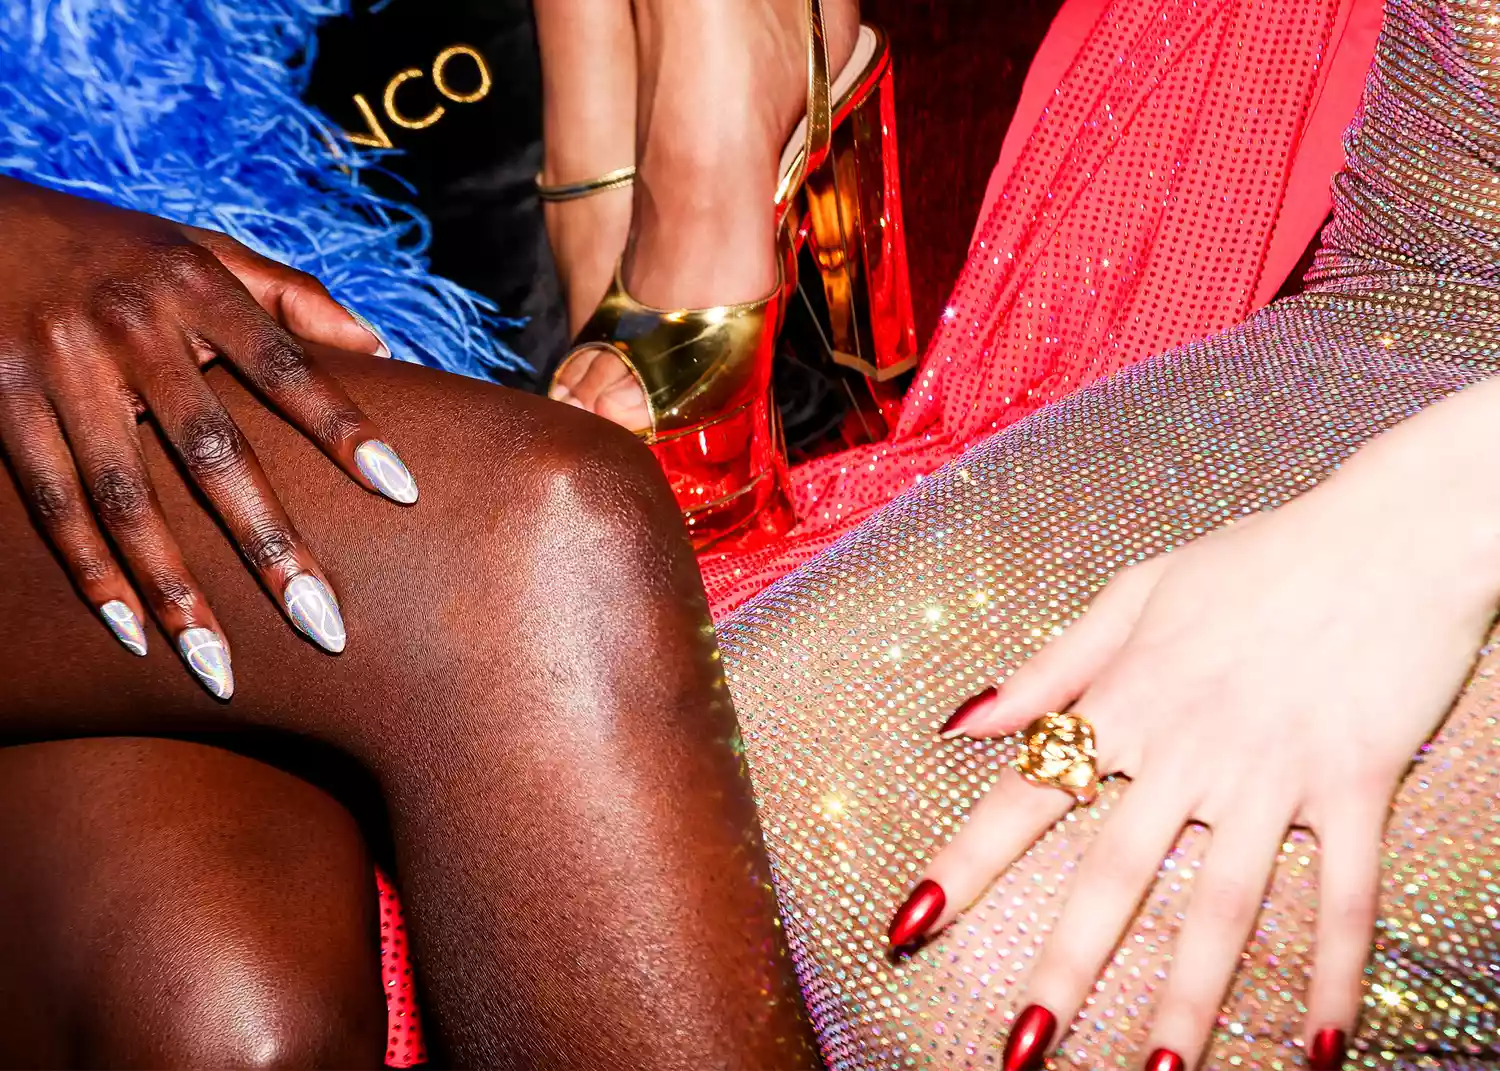 The 5 Biggest Nail Trends We Saw at New York Fashion Week